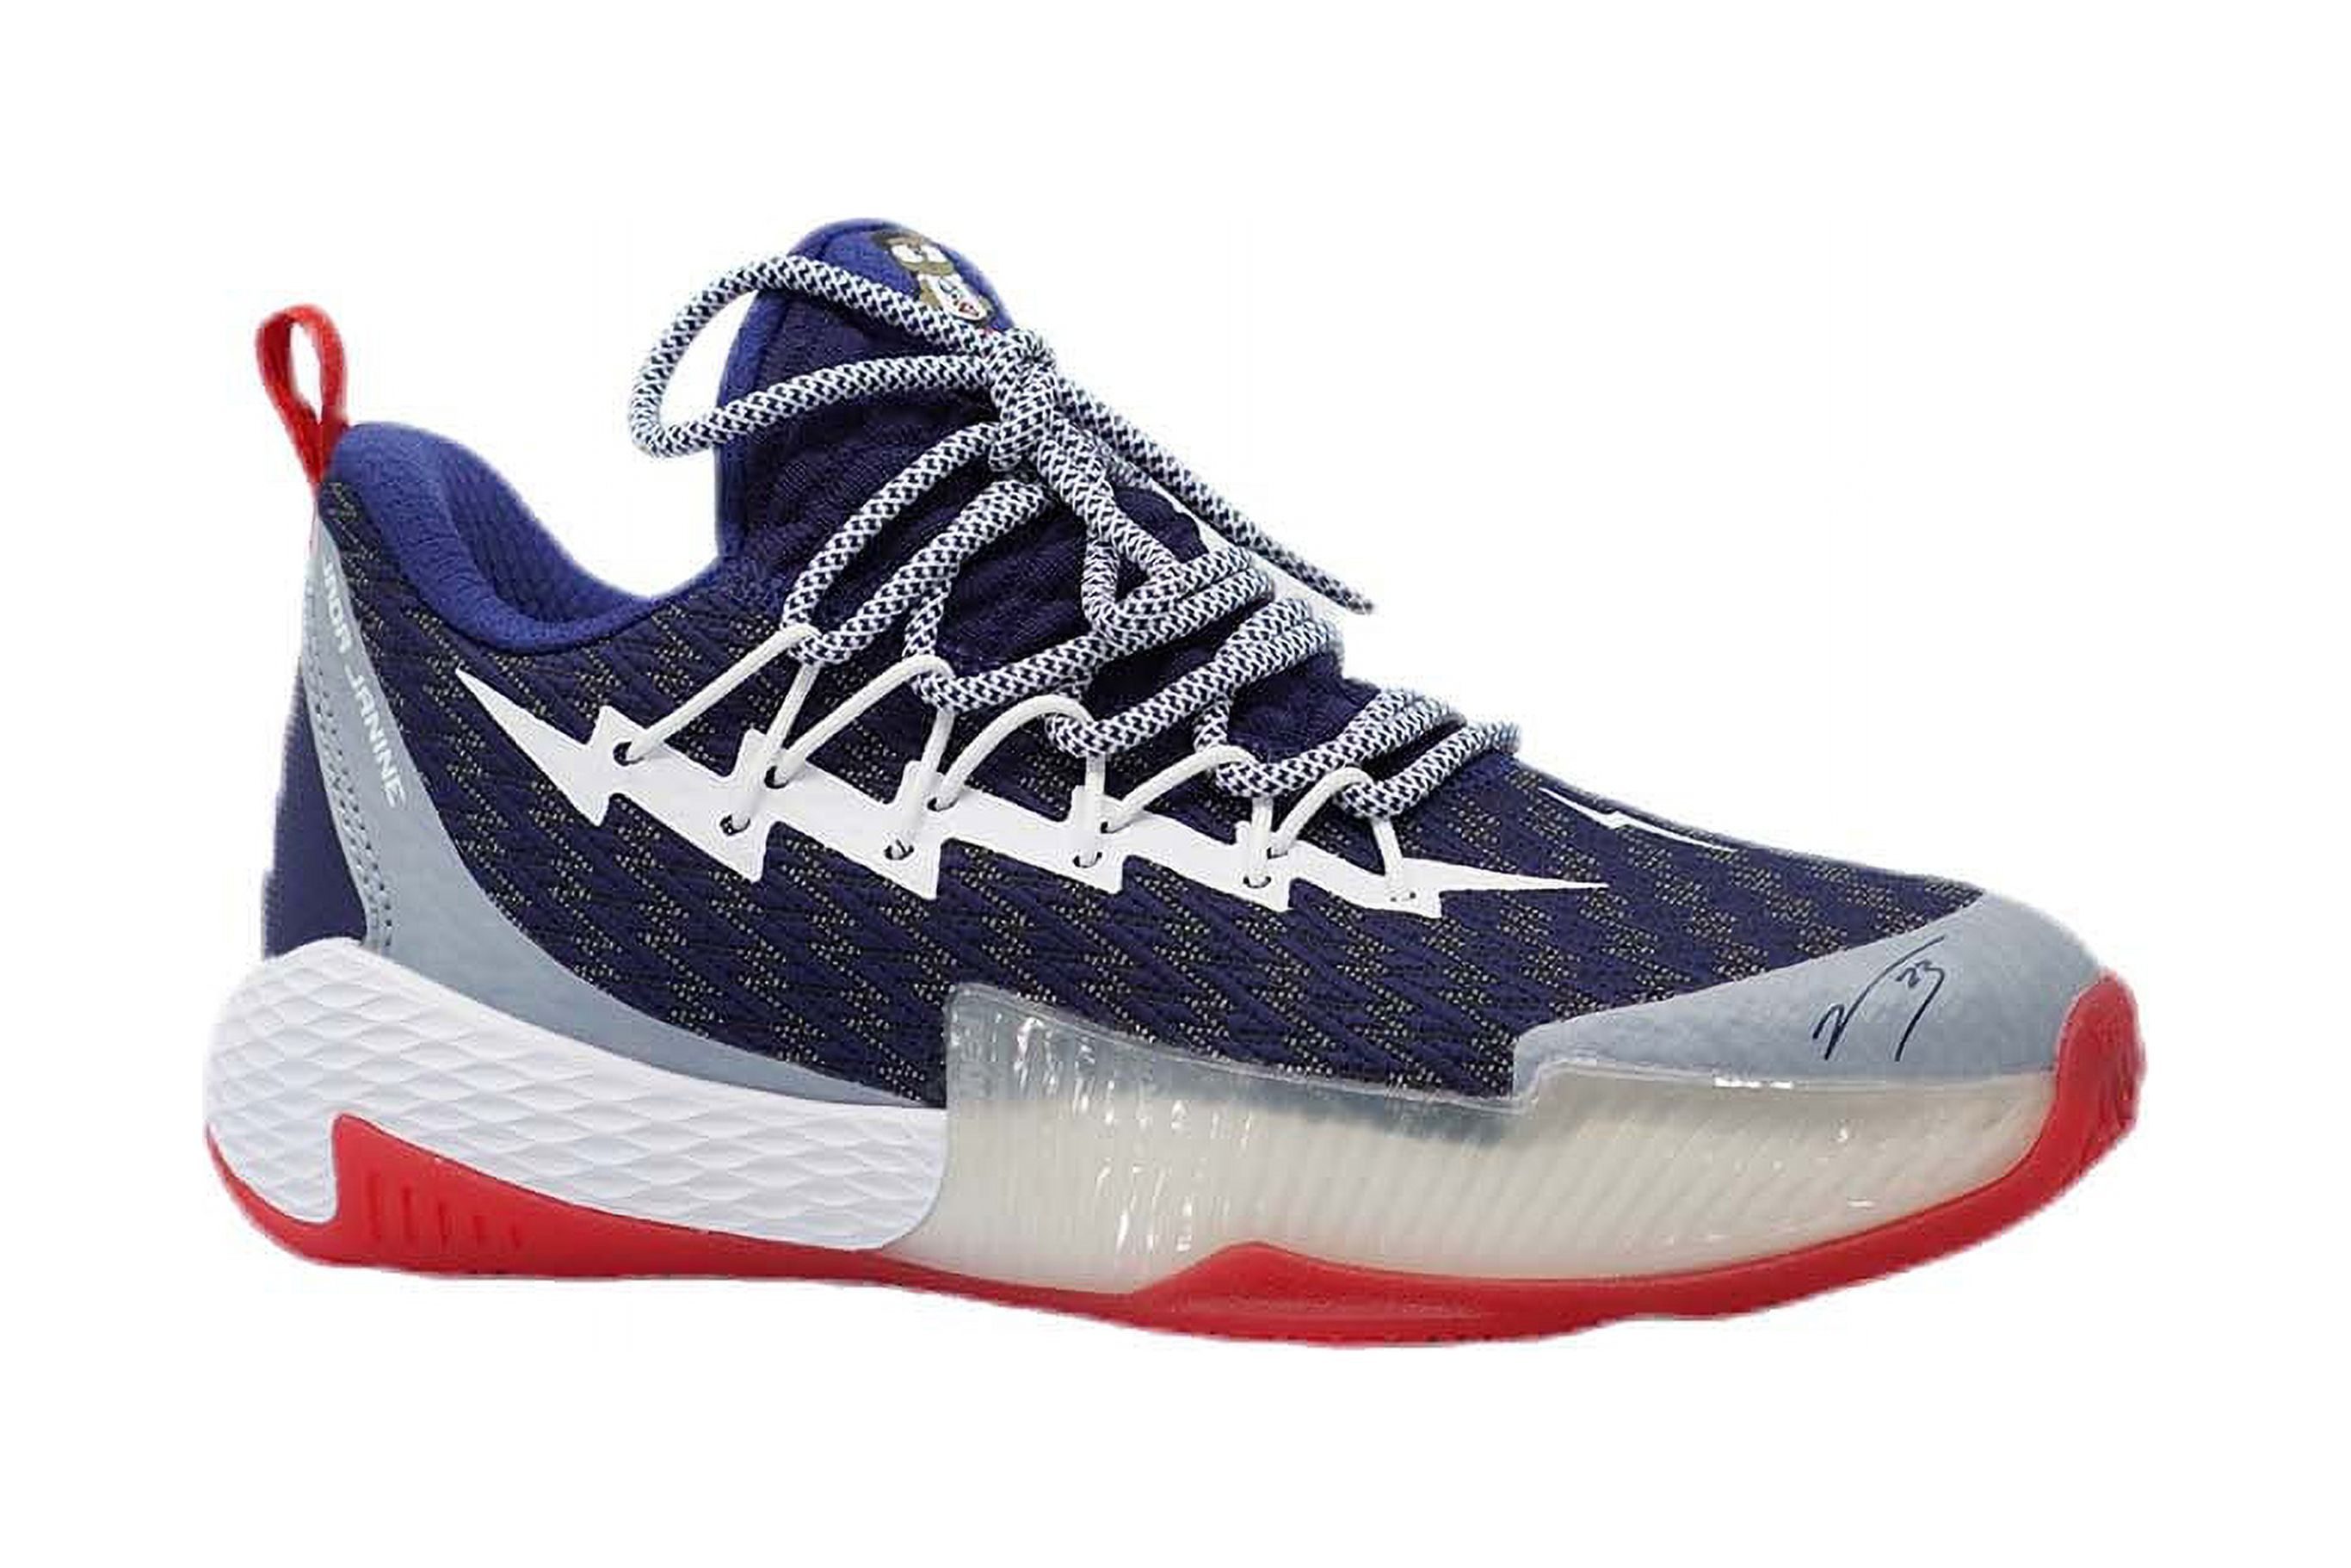 [E91351] Mens Peak Crazy 6 Lou Williams Signature Navy Red Silver Basketball Shoes - 12 - image 3 of 72